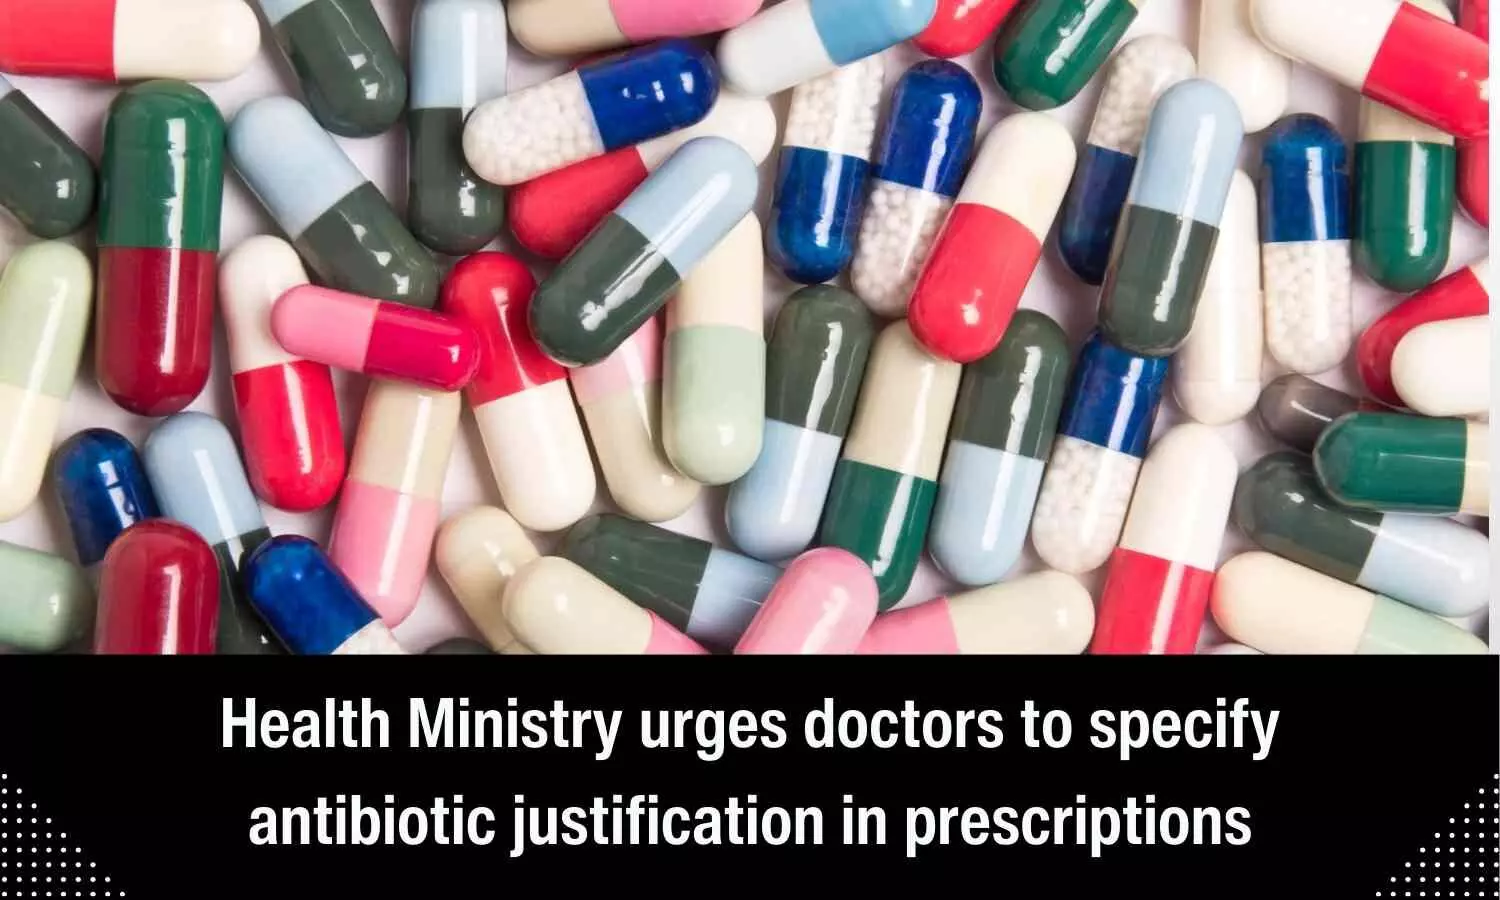 Now doctors have to specify exact indication, reason, justification while prescribing antibiotics